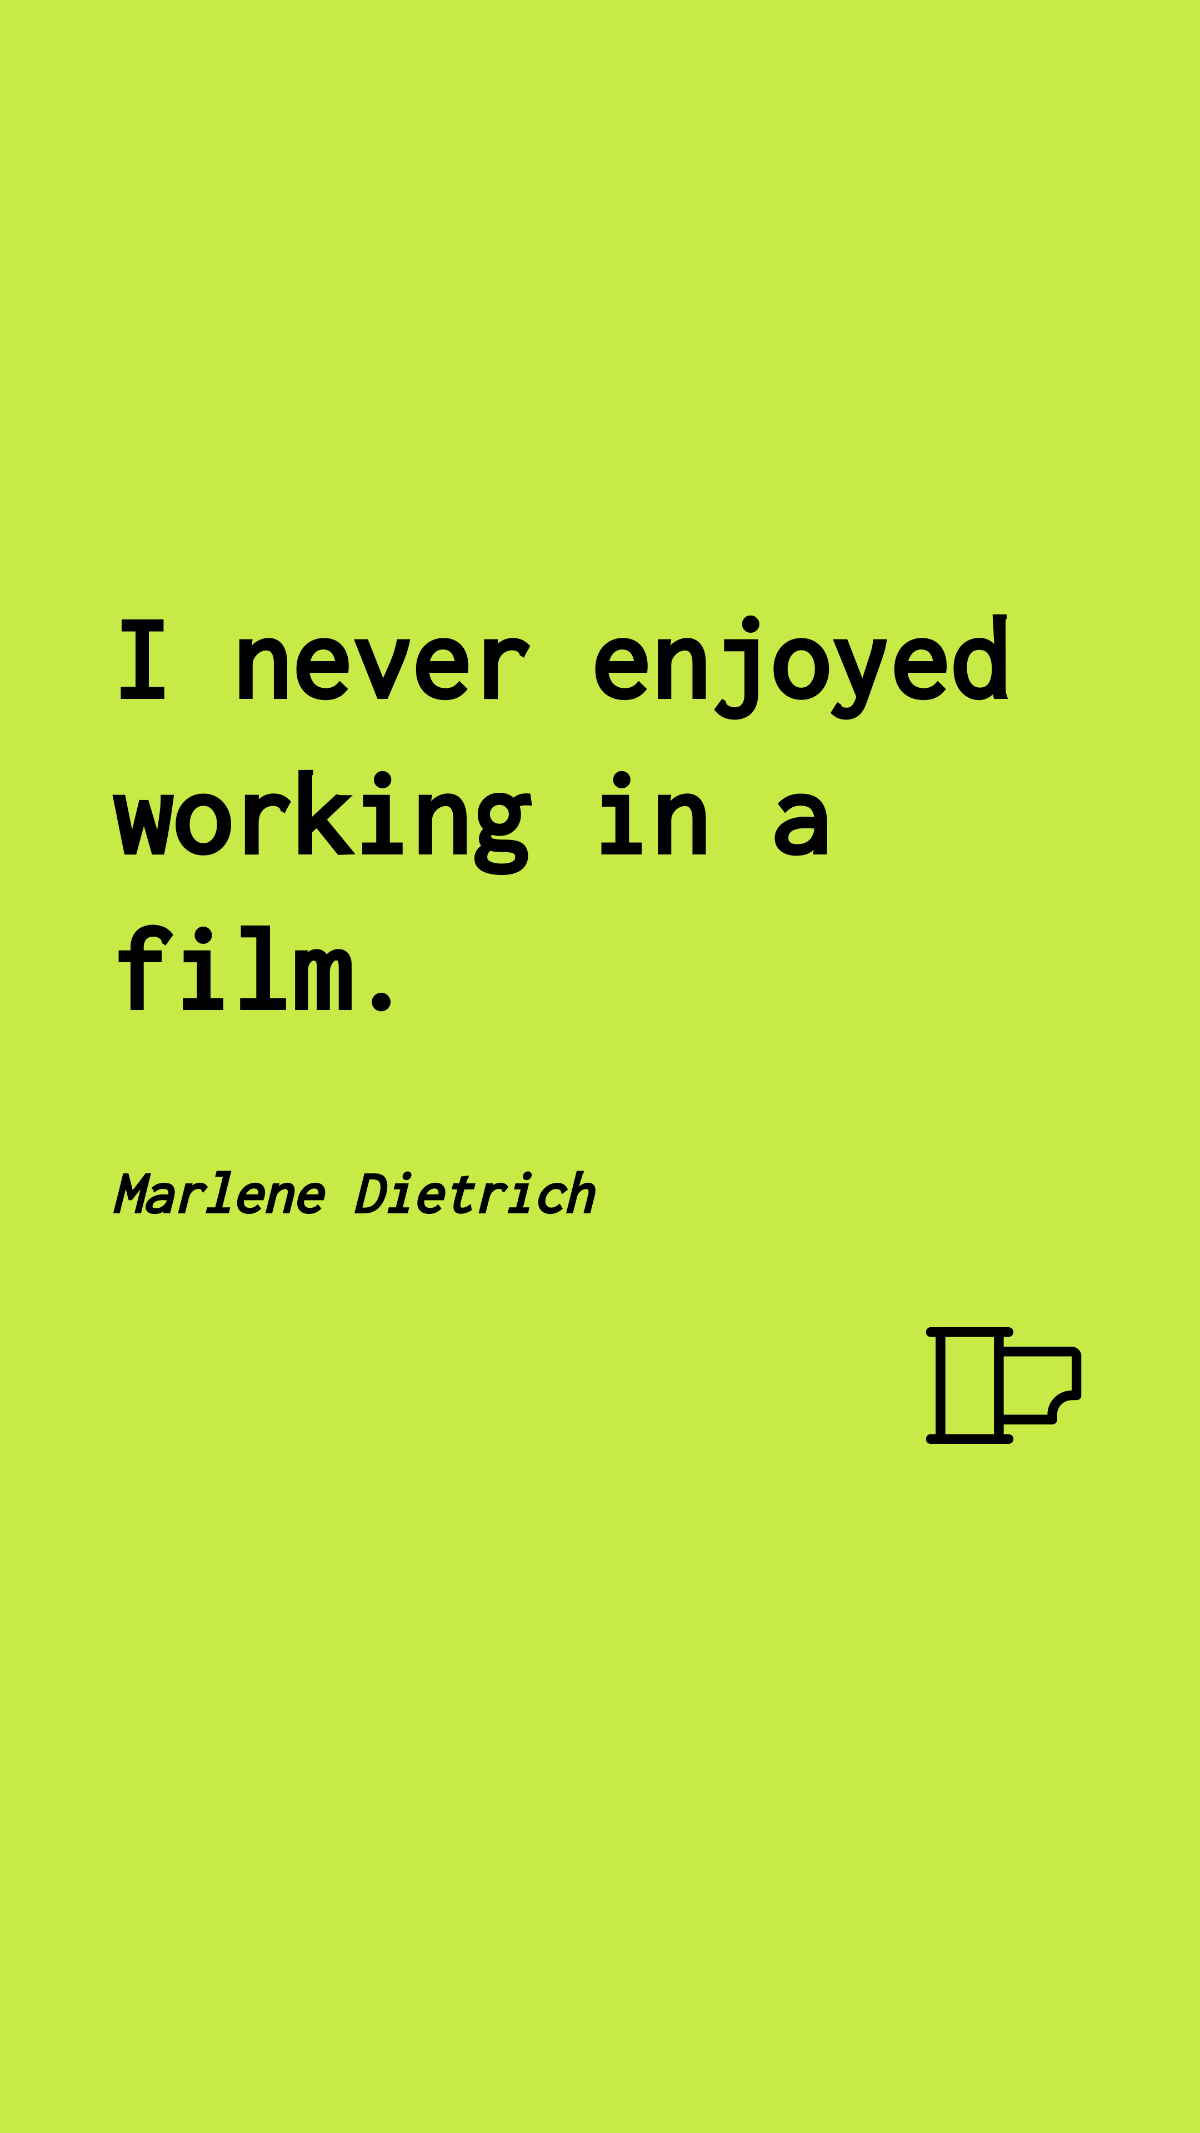 Marlene Dietrich - I never enjoyed working in a film. Template